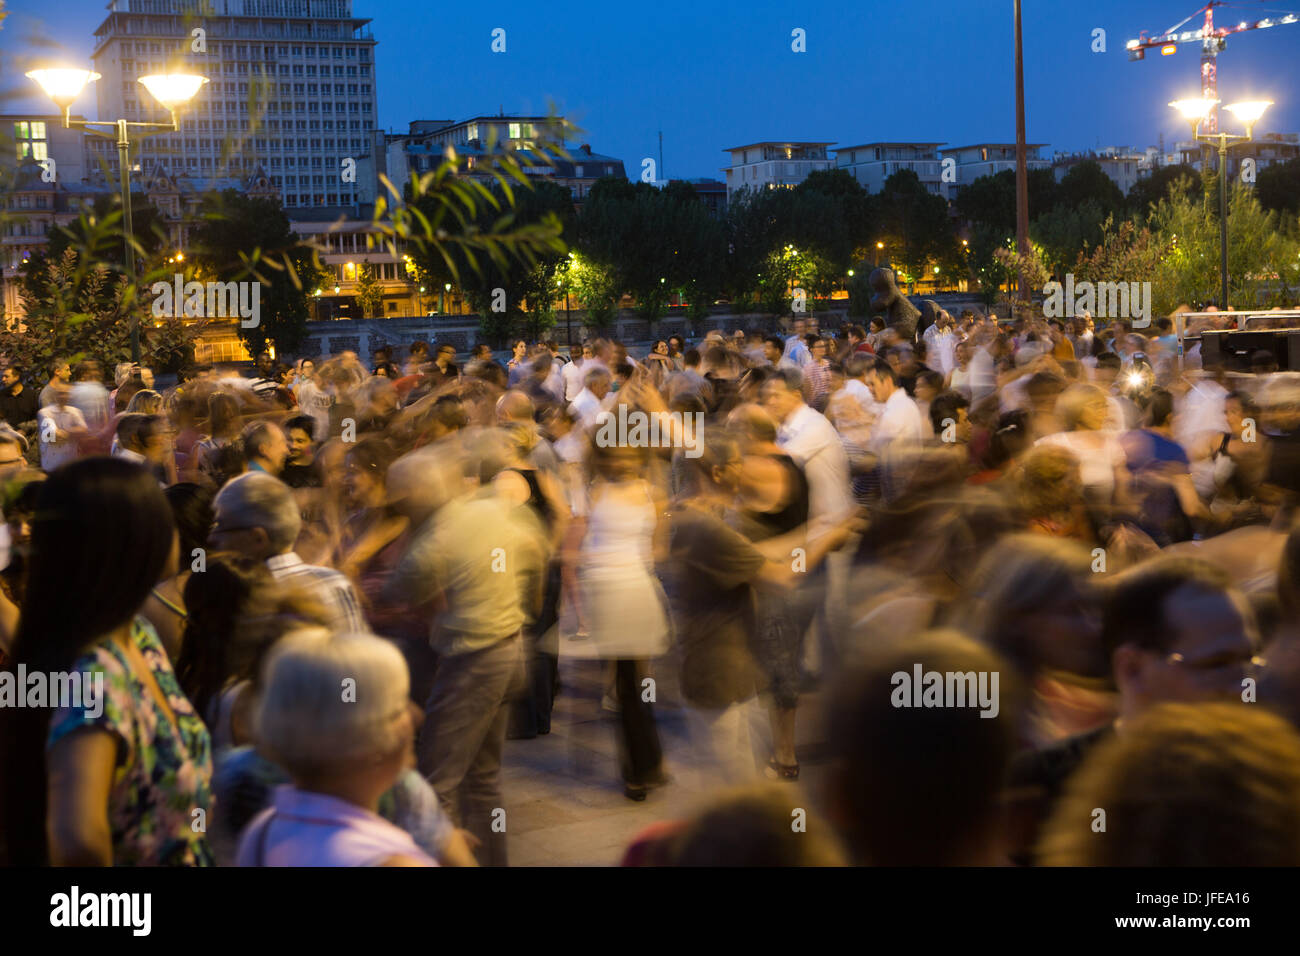 On summer nights Parisians learn and dance the tango. Stock Photo